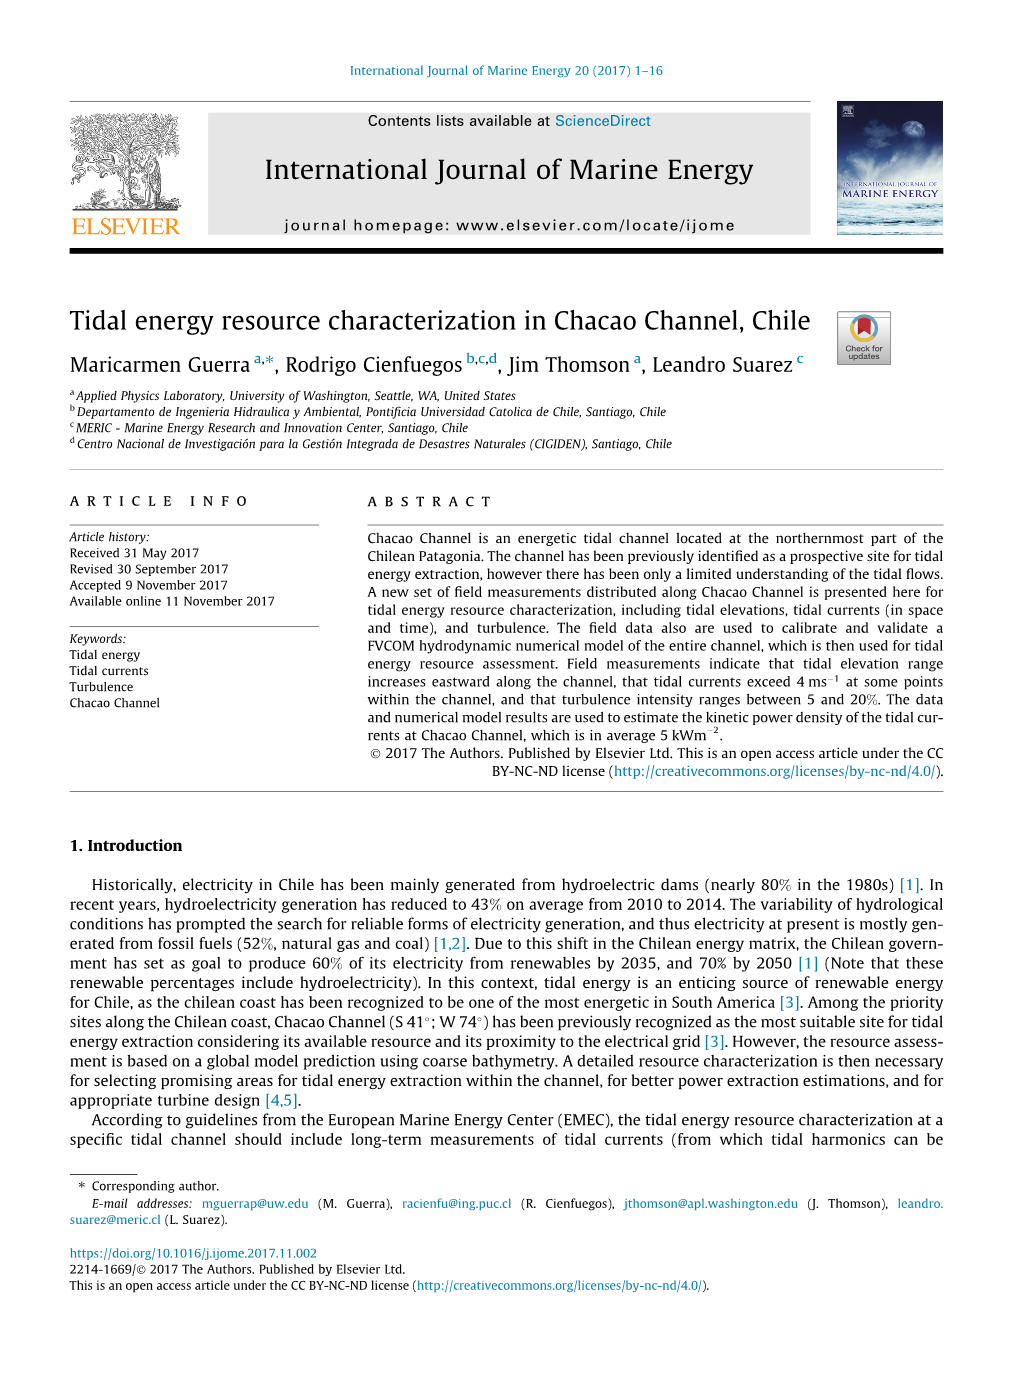 Tidal Energy Resource Characterization in Chacao Channel, Chile